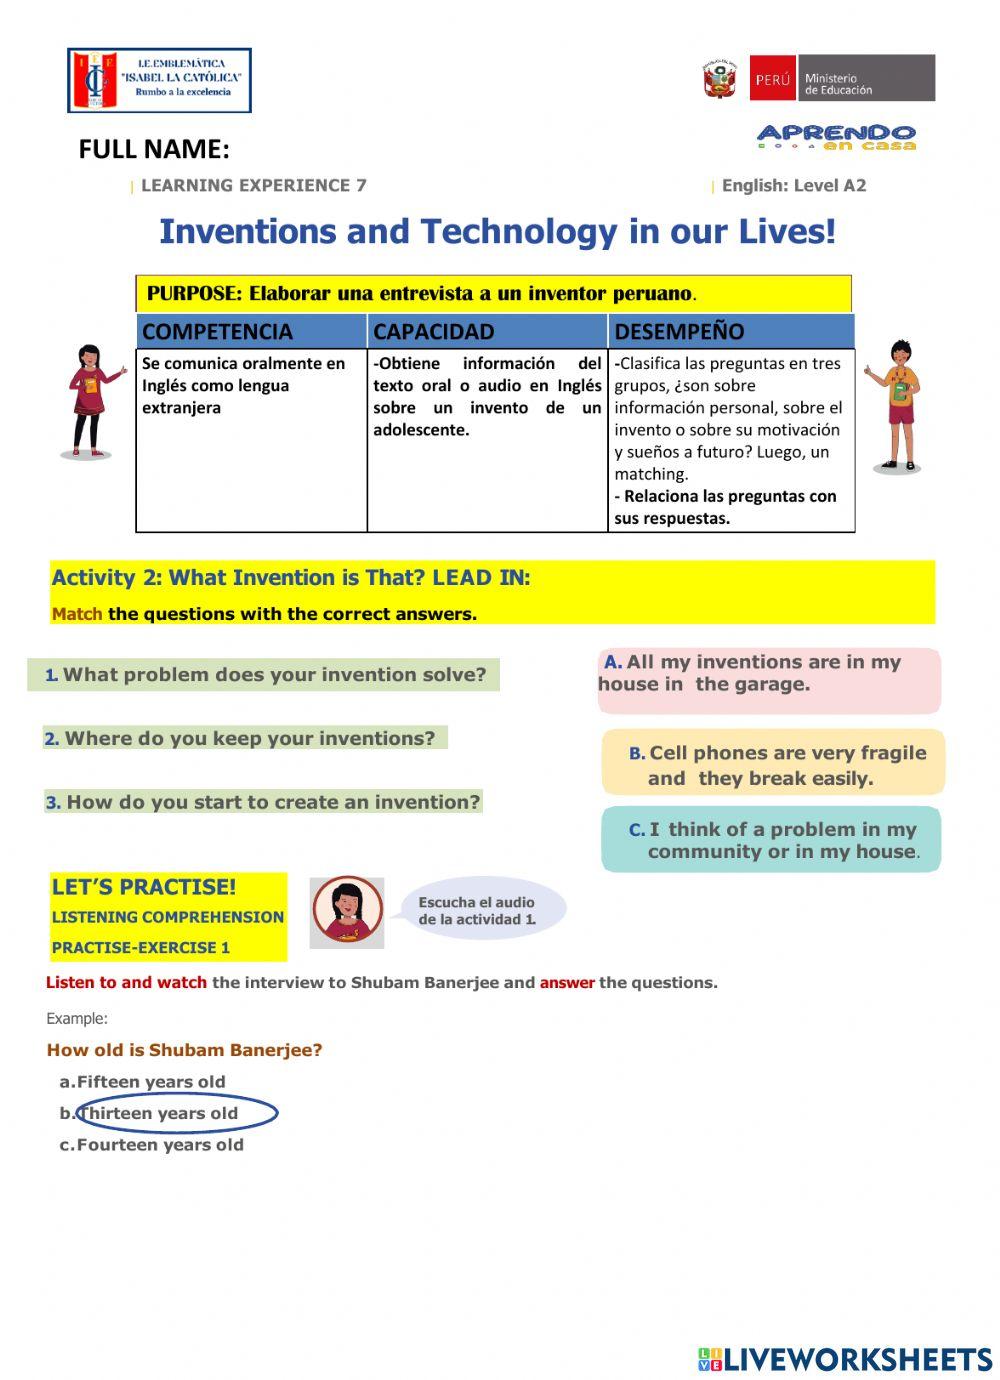 Activity 2 of inventions and Technology in our lives.